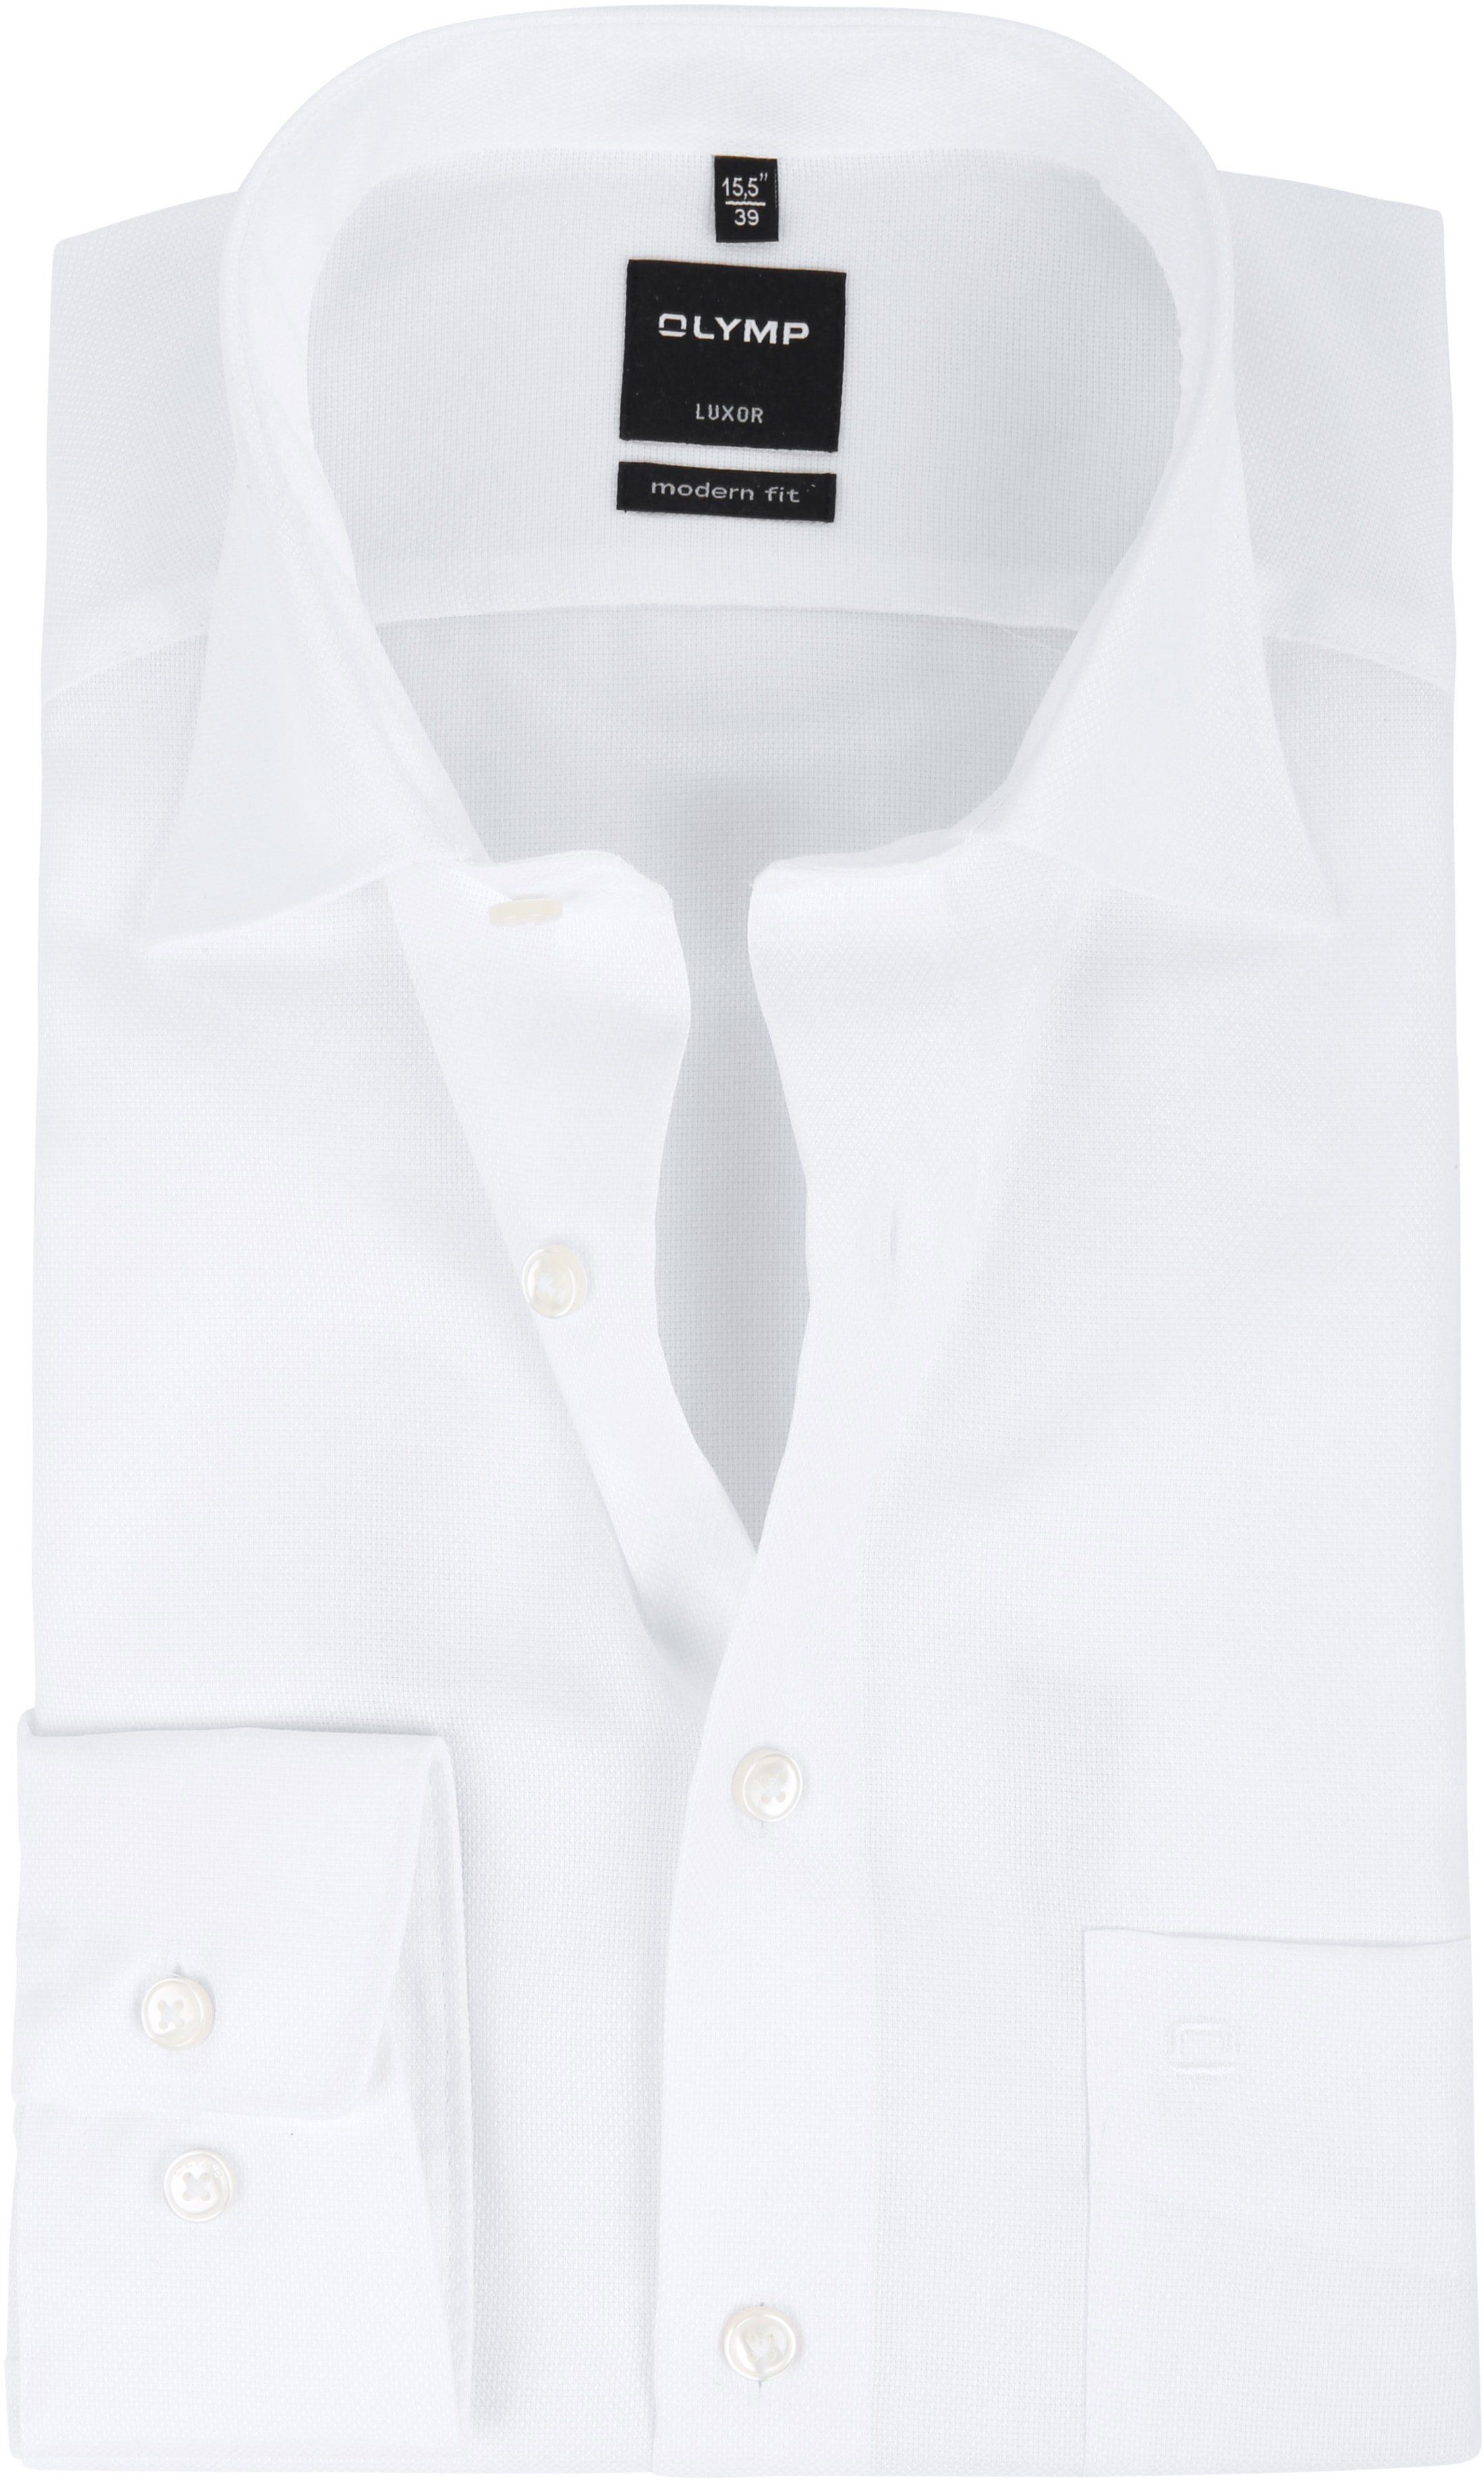 Olymp Luxor Shirt Modern Fit White size 47